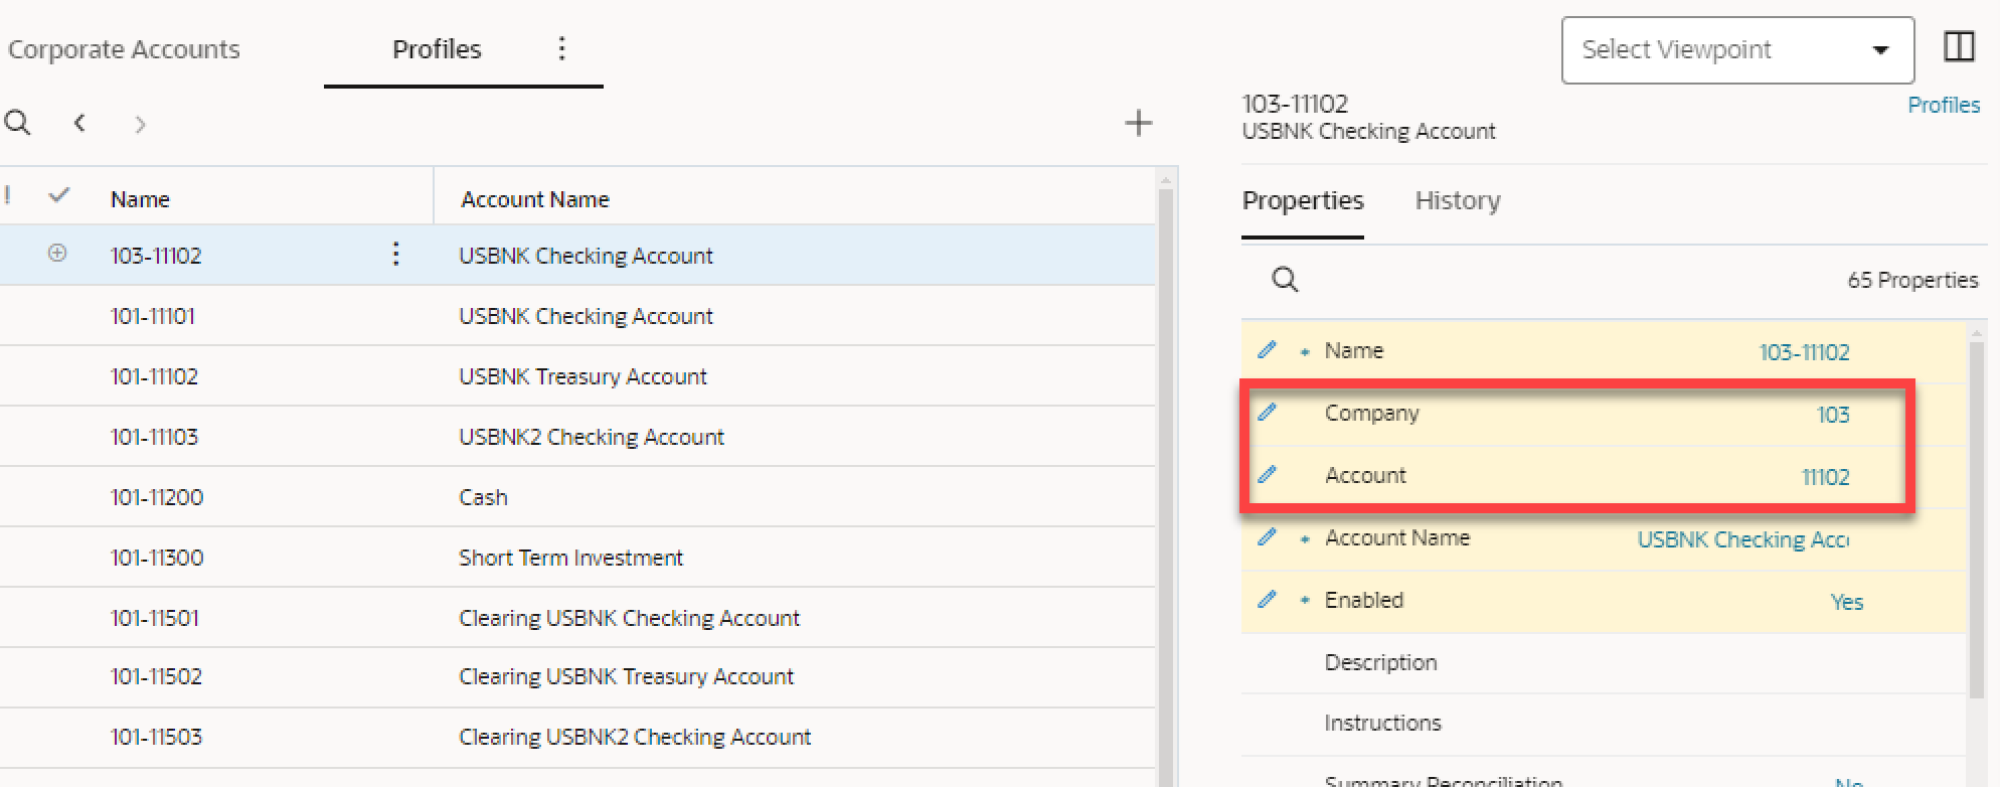 Oracle EDM screenshot showing how to automatically generate an account name using company and account property fields